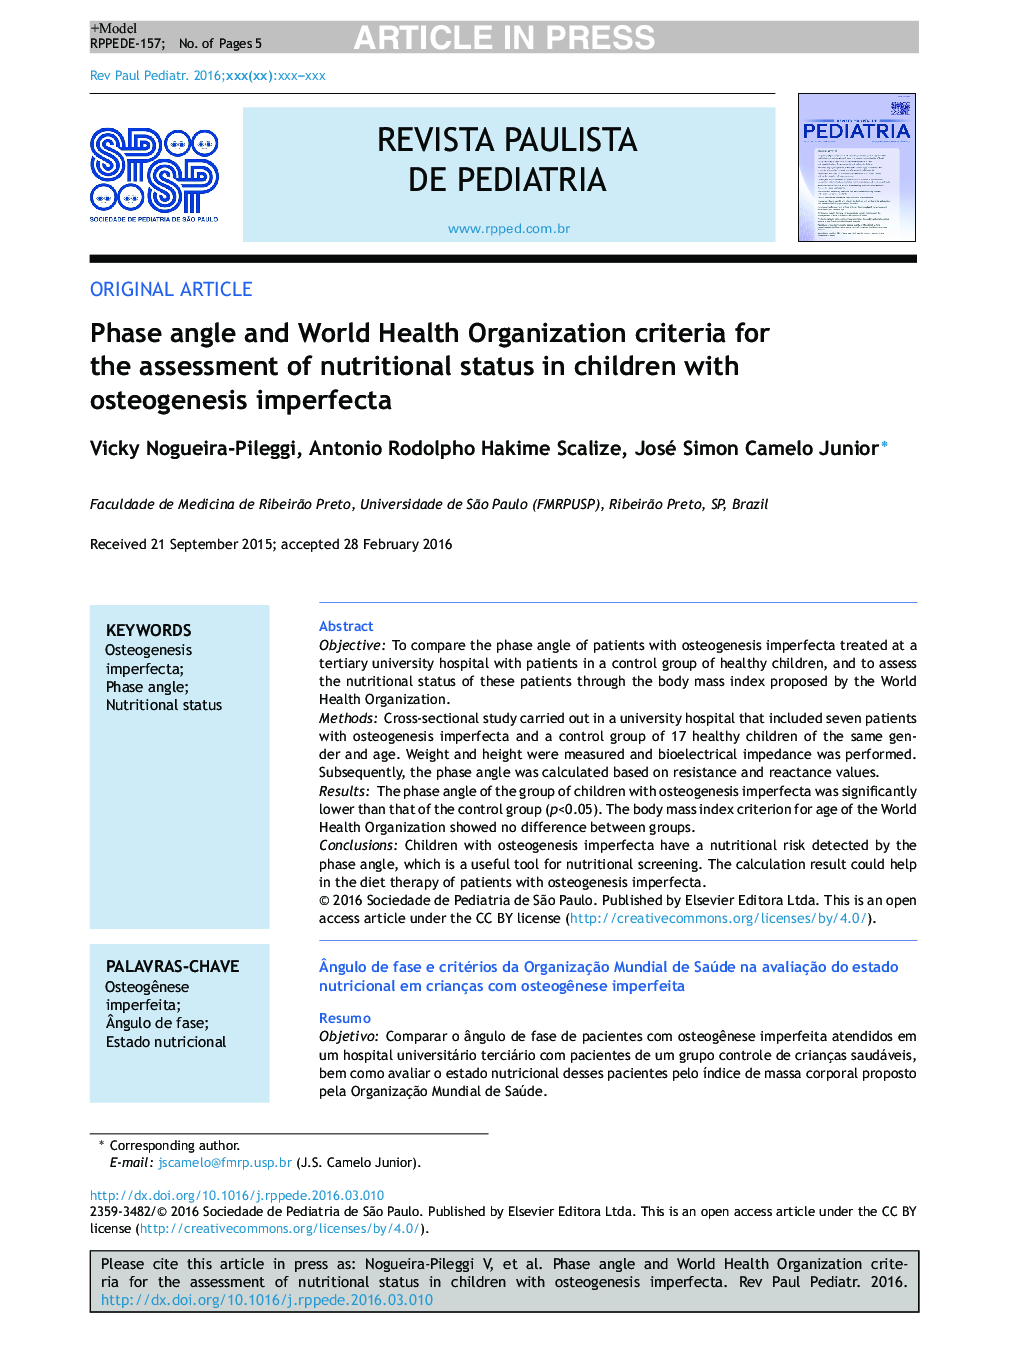 Phase angle and World Health Organization criteria for the assessment of nutritional status in children with osteogenesis imperfecta